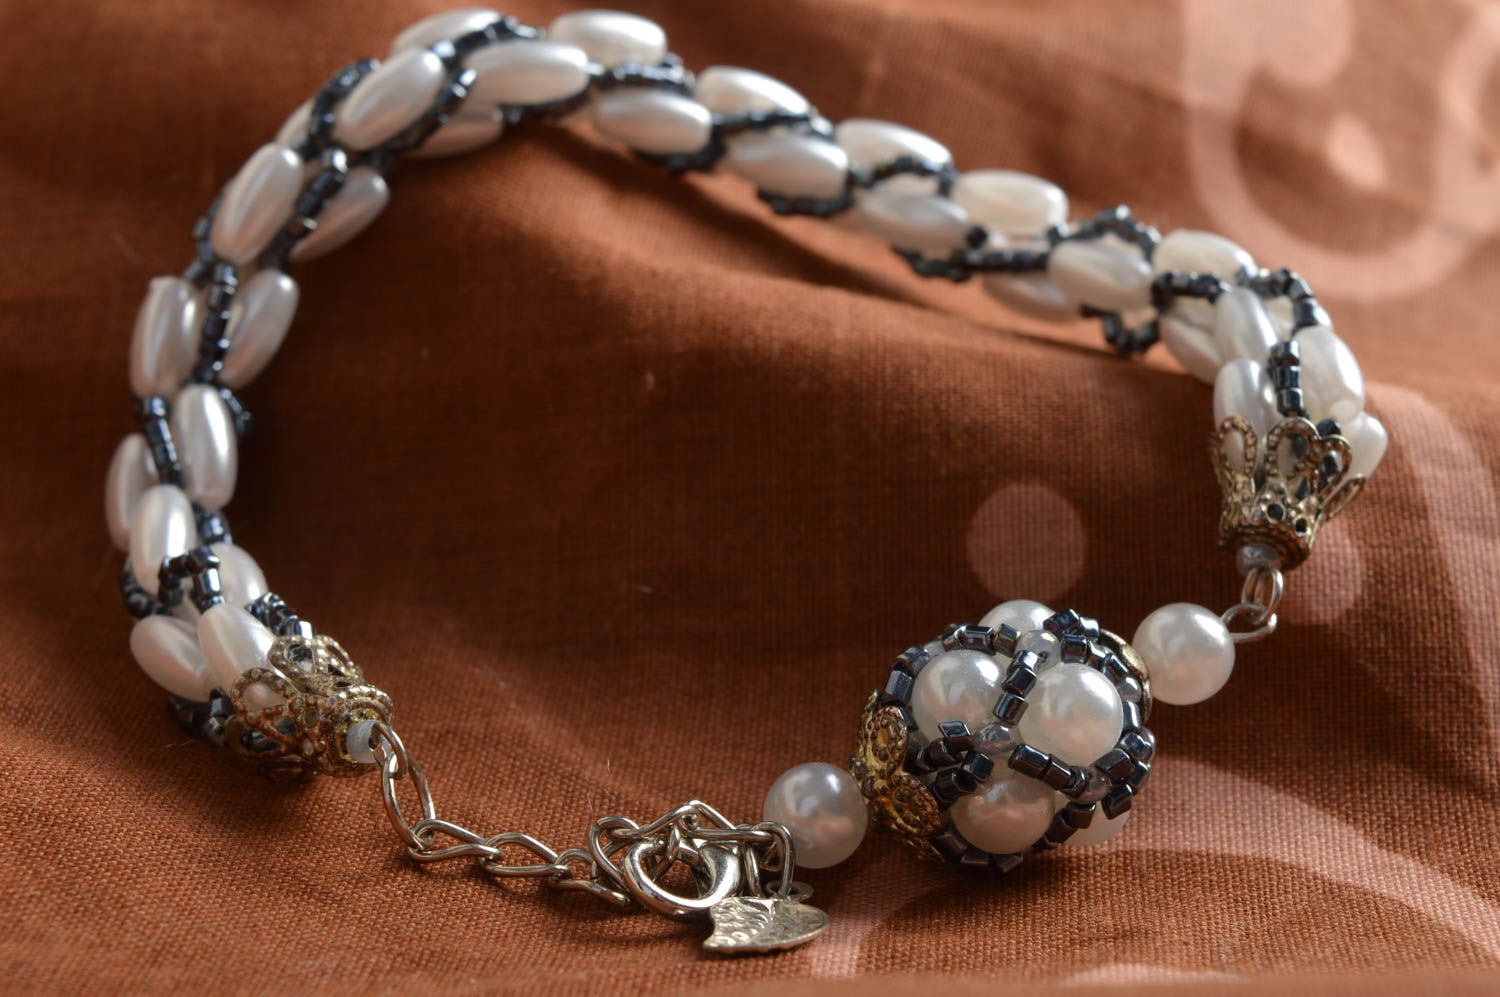 Handmade designer wrist bracelet with beads and faux pearls of white color photo 1